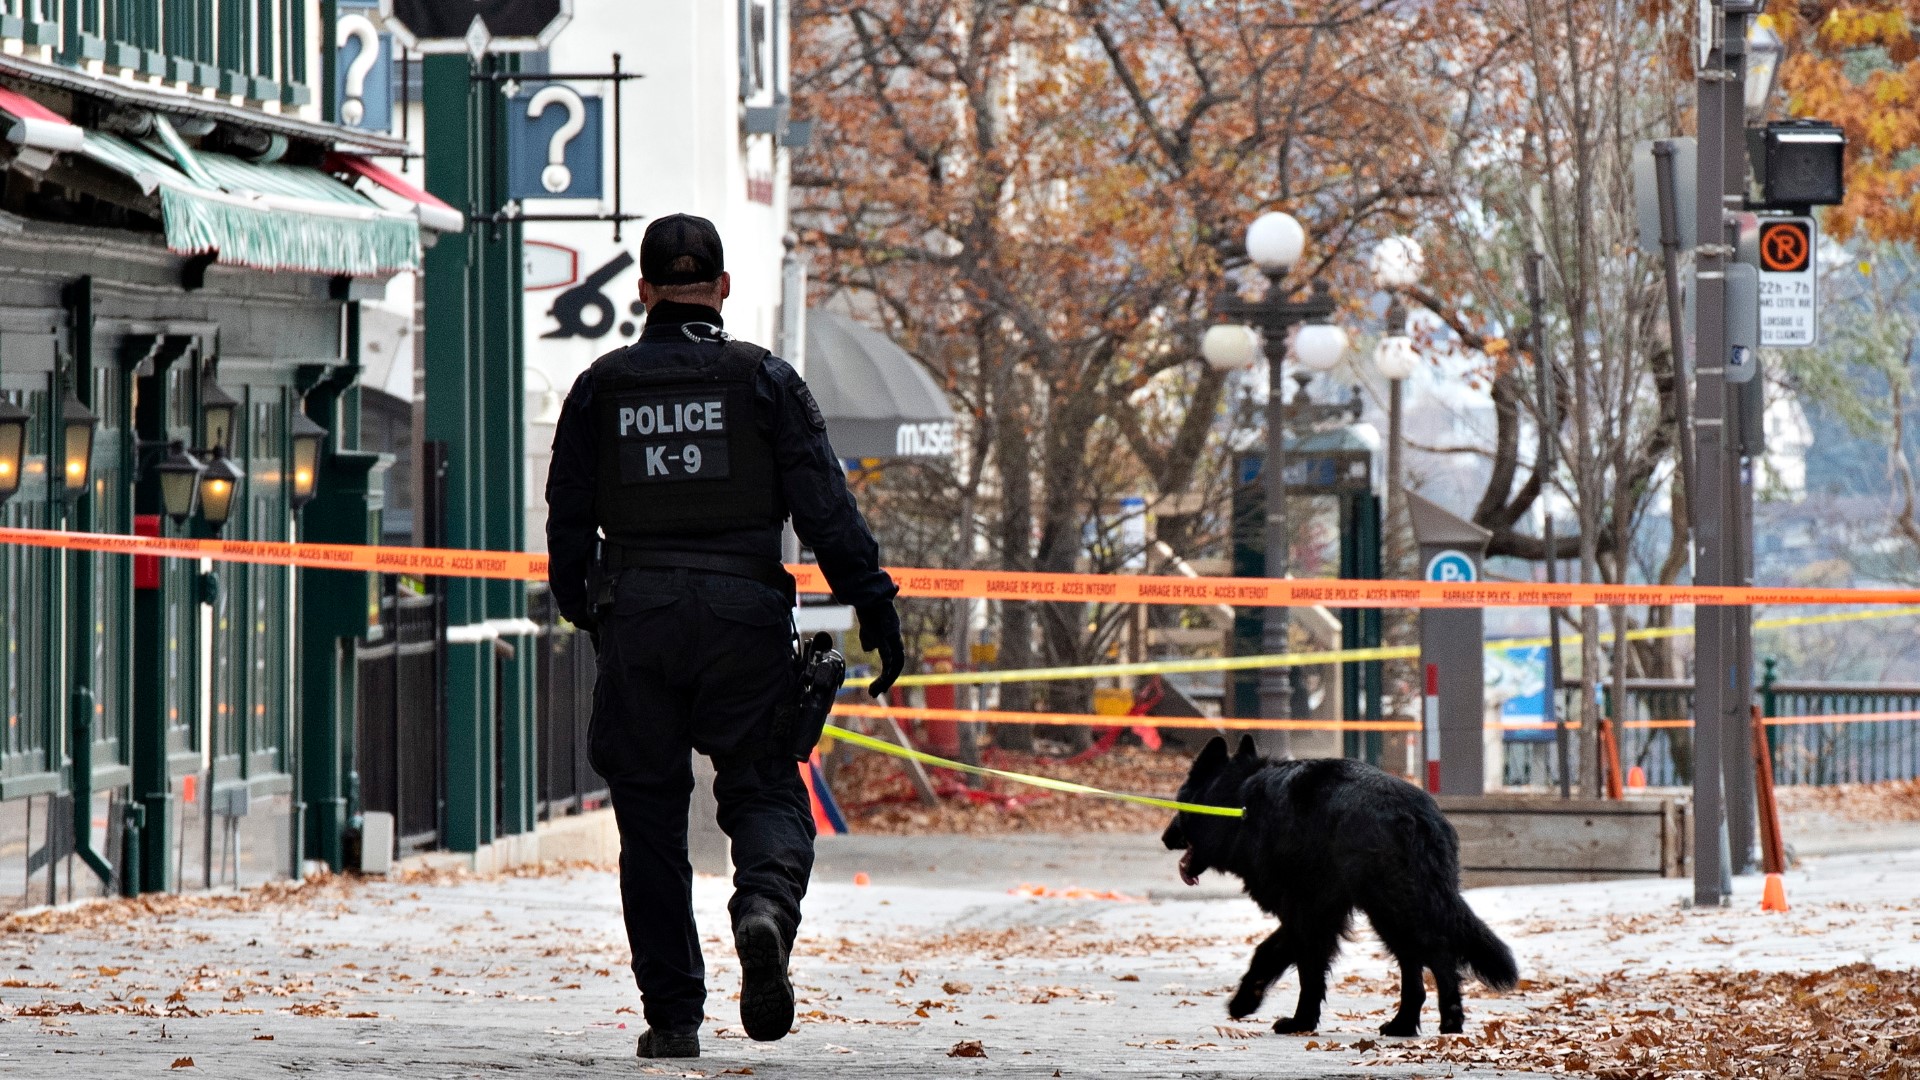 A man in medieval clothing and armed with a Japanese sword was arrested Sunday on suspicion of killing two people and injuring five others Halloween in Canada.